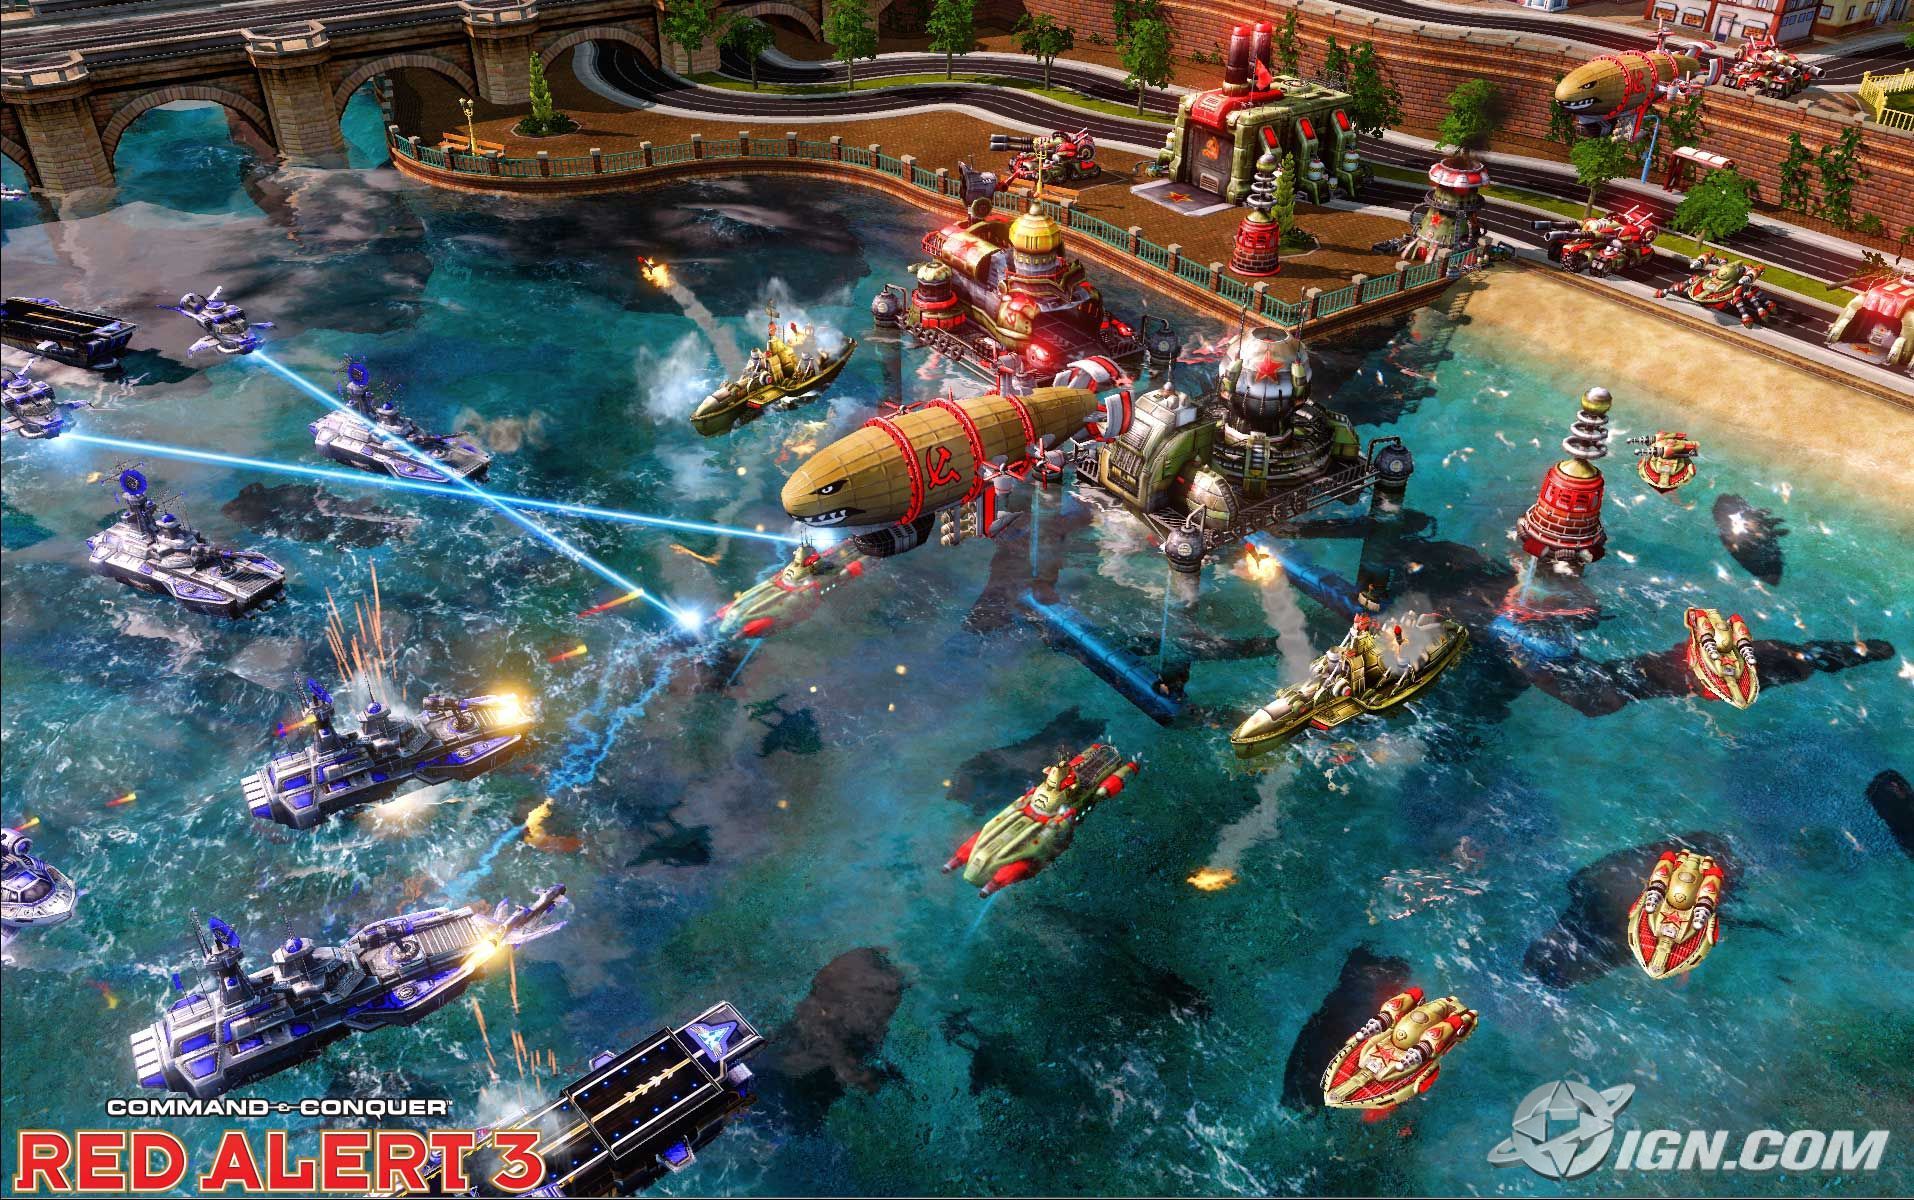 command and conquer red alert 3 uprising features